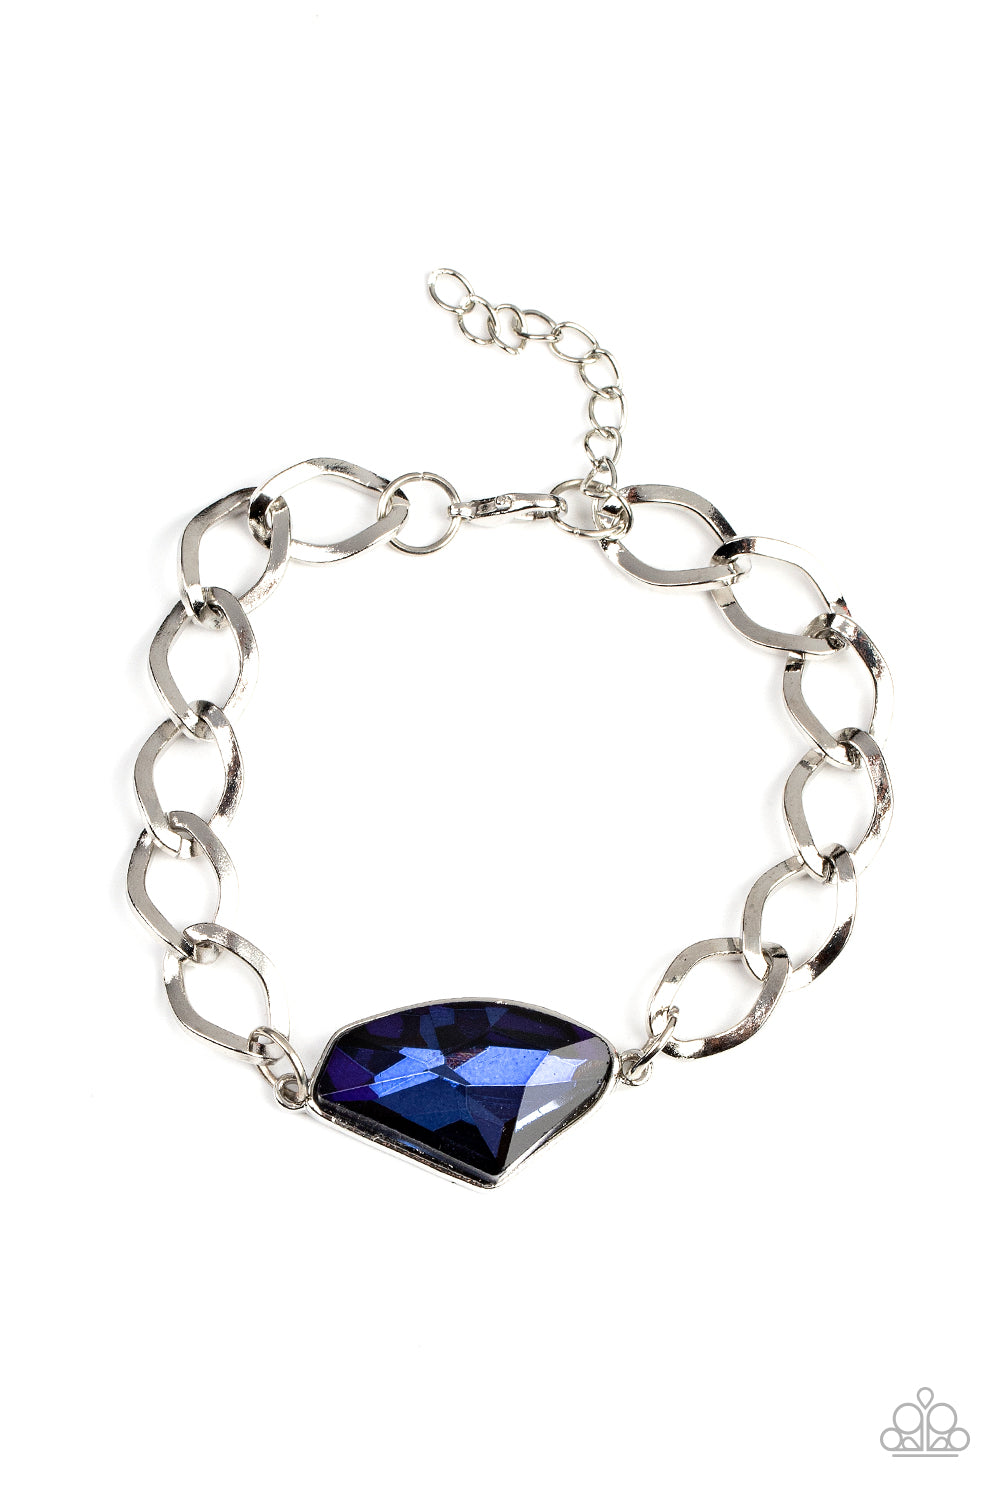 Galactic Grunge Blue Bracelet - Paparazzi Accessories  An oversized raw cut blue gem is pressed into a sleek silver frame that attaches to a bold silver chain around the wrist for a glitzy grunge fashion. Features an adjustable clasp closure.  Sold as one individual bracelet.